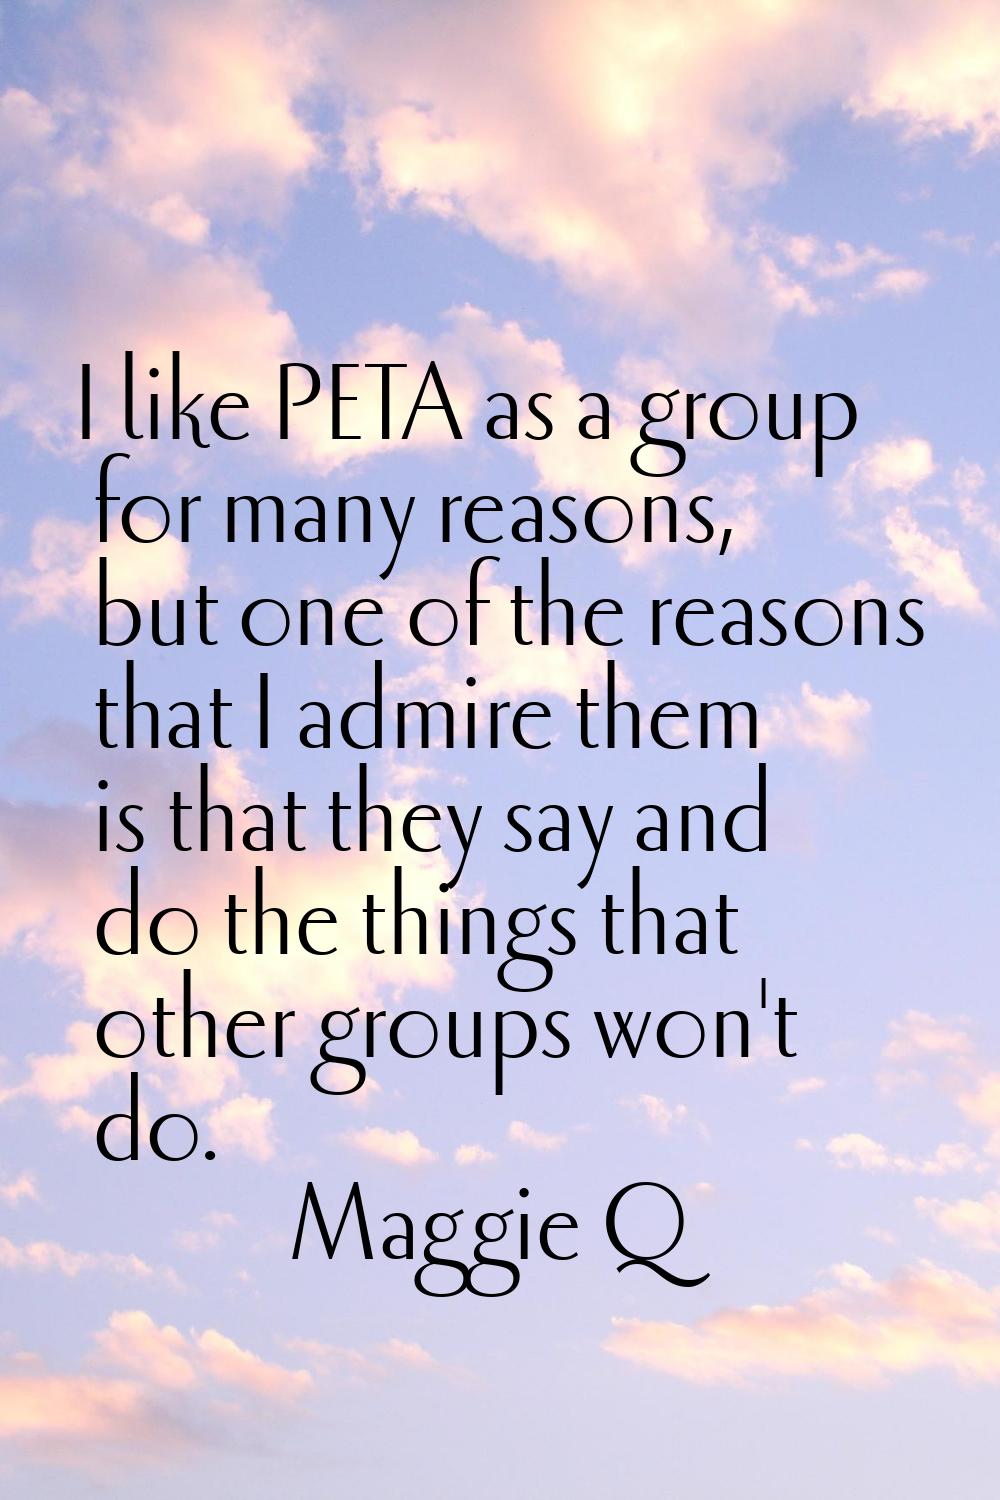 I like PETA as a group for many reasons, but one of the reasons that I admire them is that they say